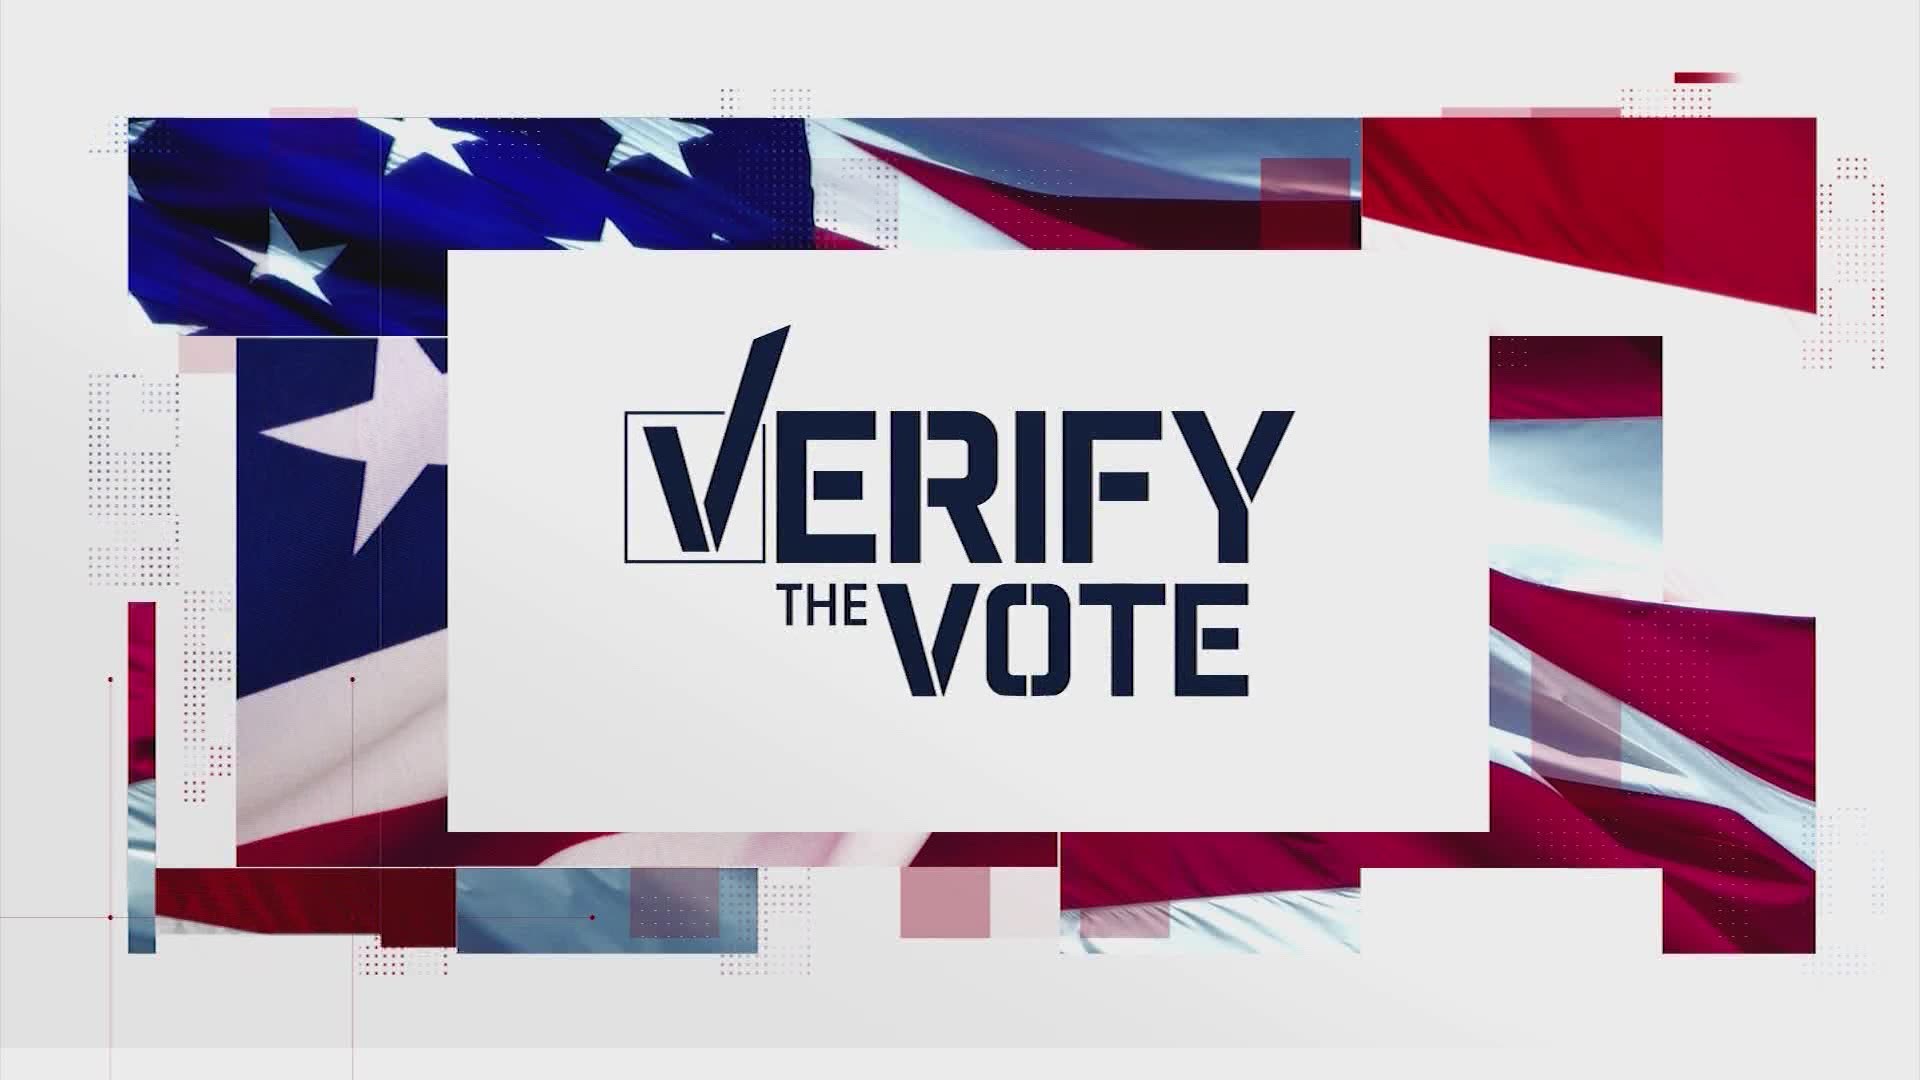 The Verify team is working to sort fact from fiction when it comes to election season.